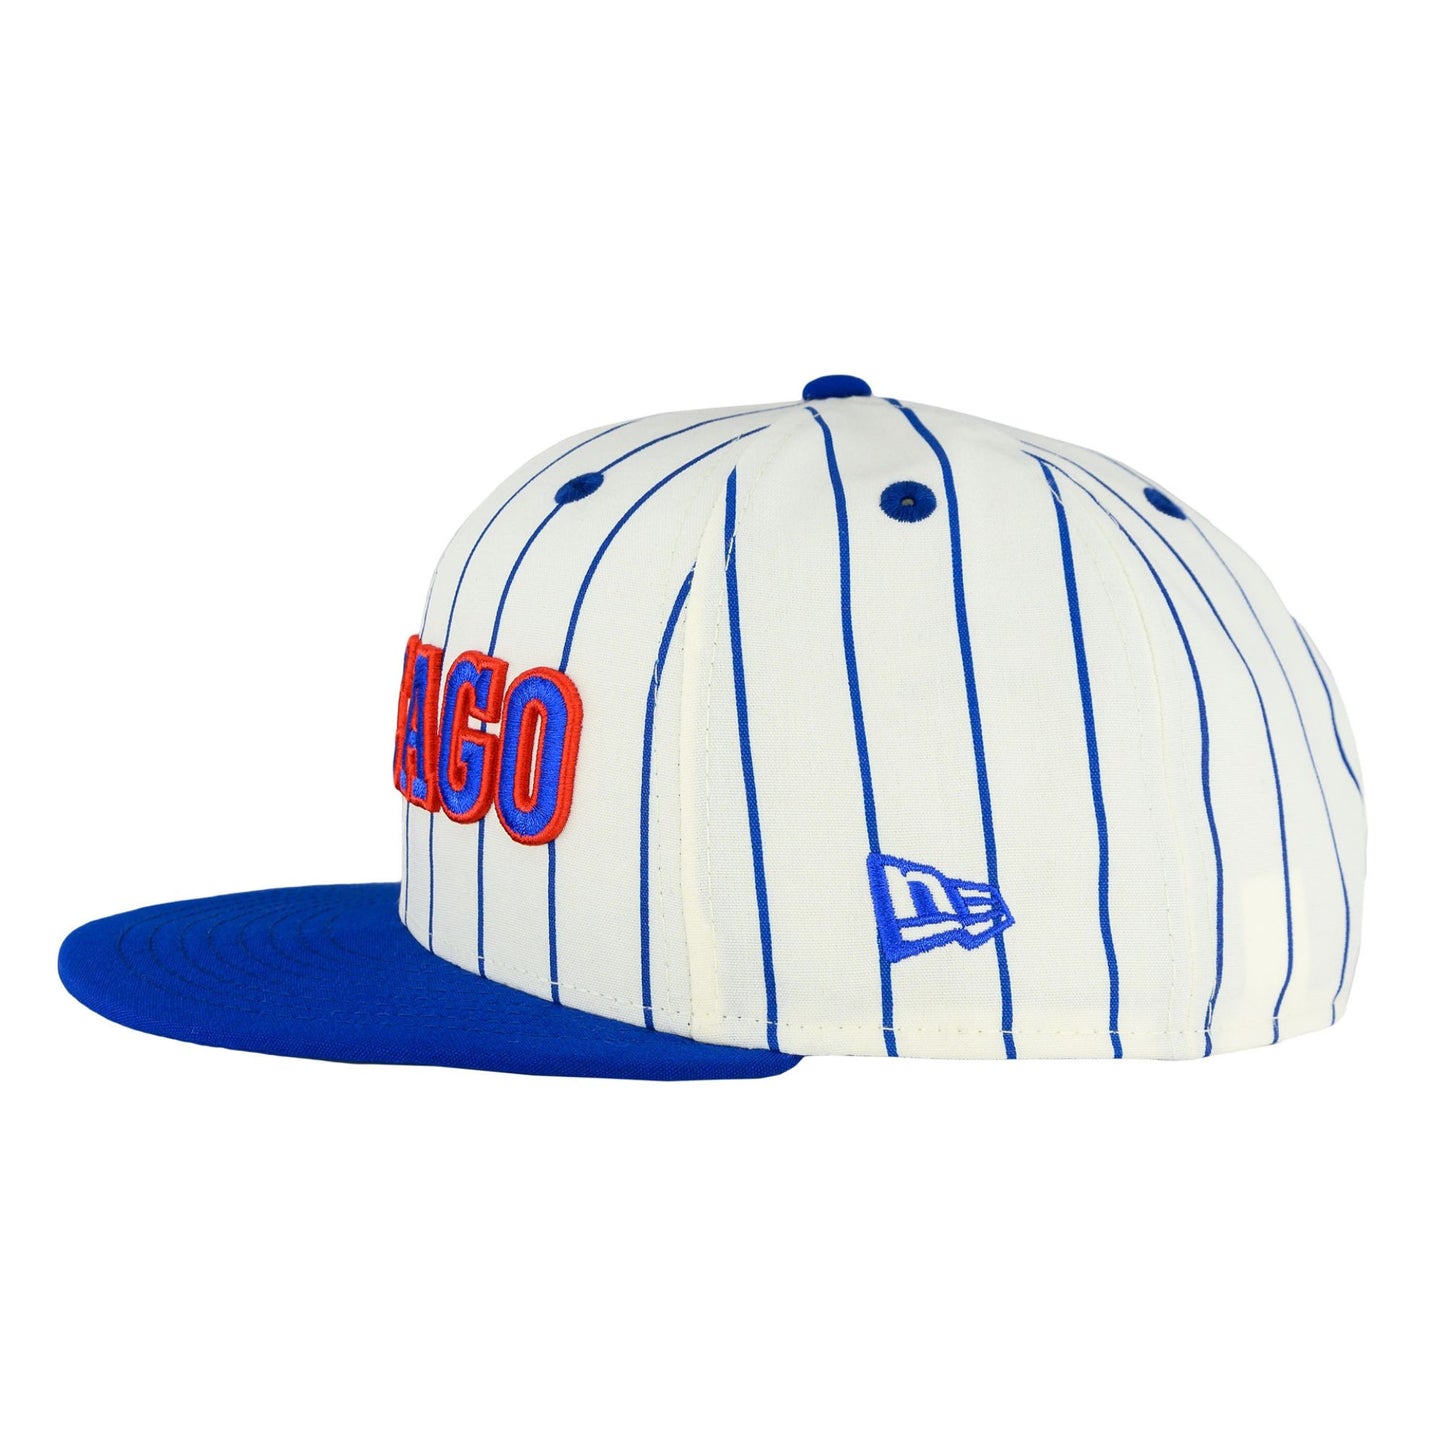 Chicago Cubs Cooperstown 1979 Chrome Pinstripe New Era 9FIFTY Snapback Hat